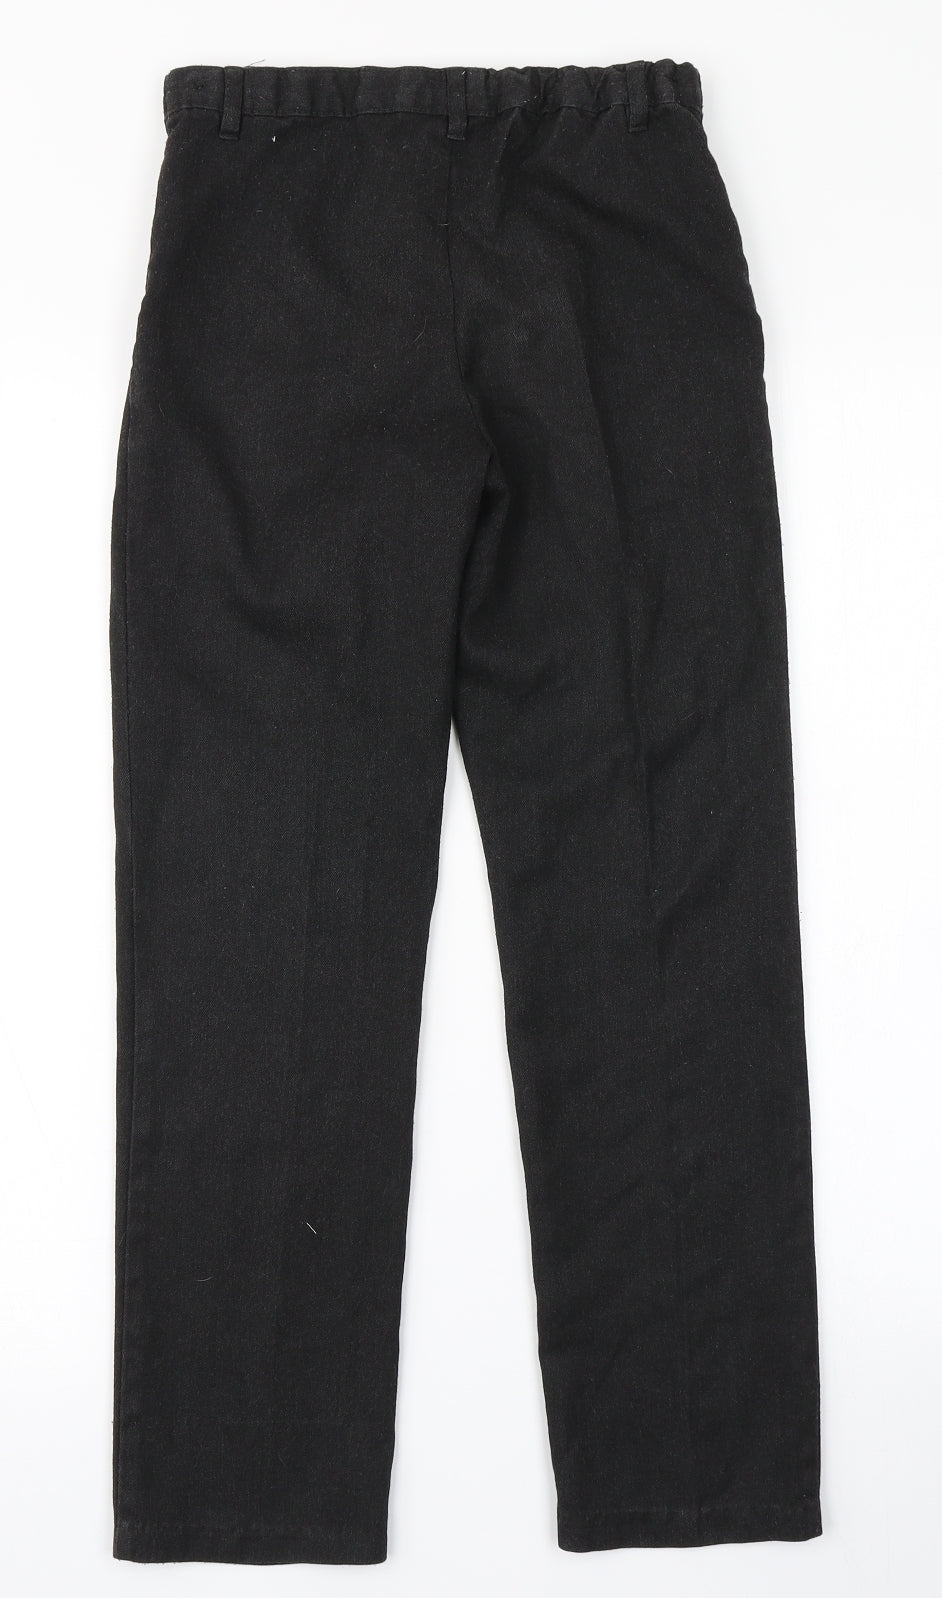 George Boys Grey   Dress Pants Trousers Size 10-11 Years